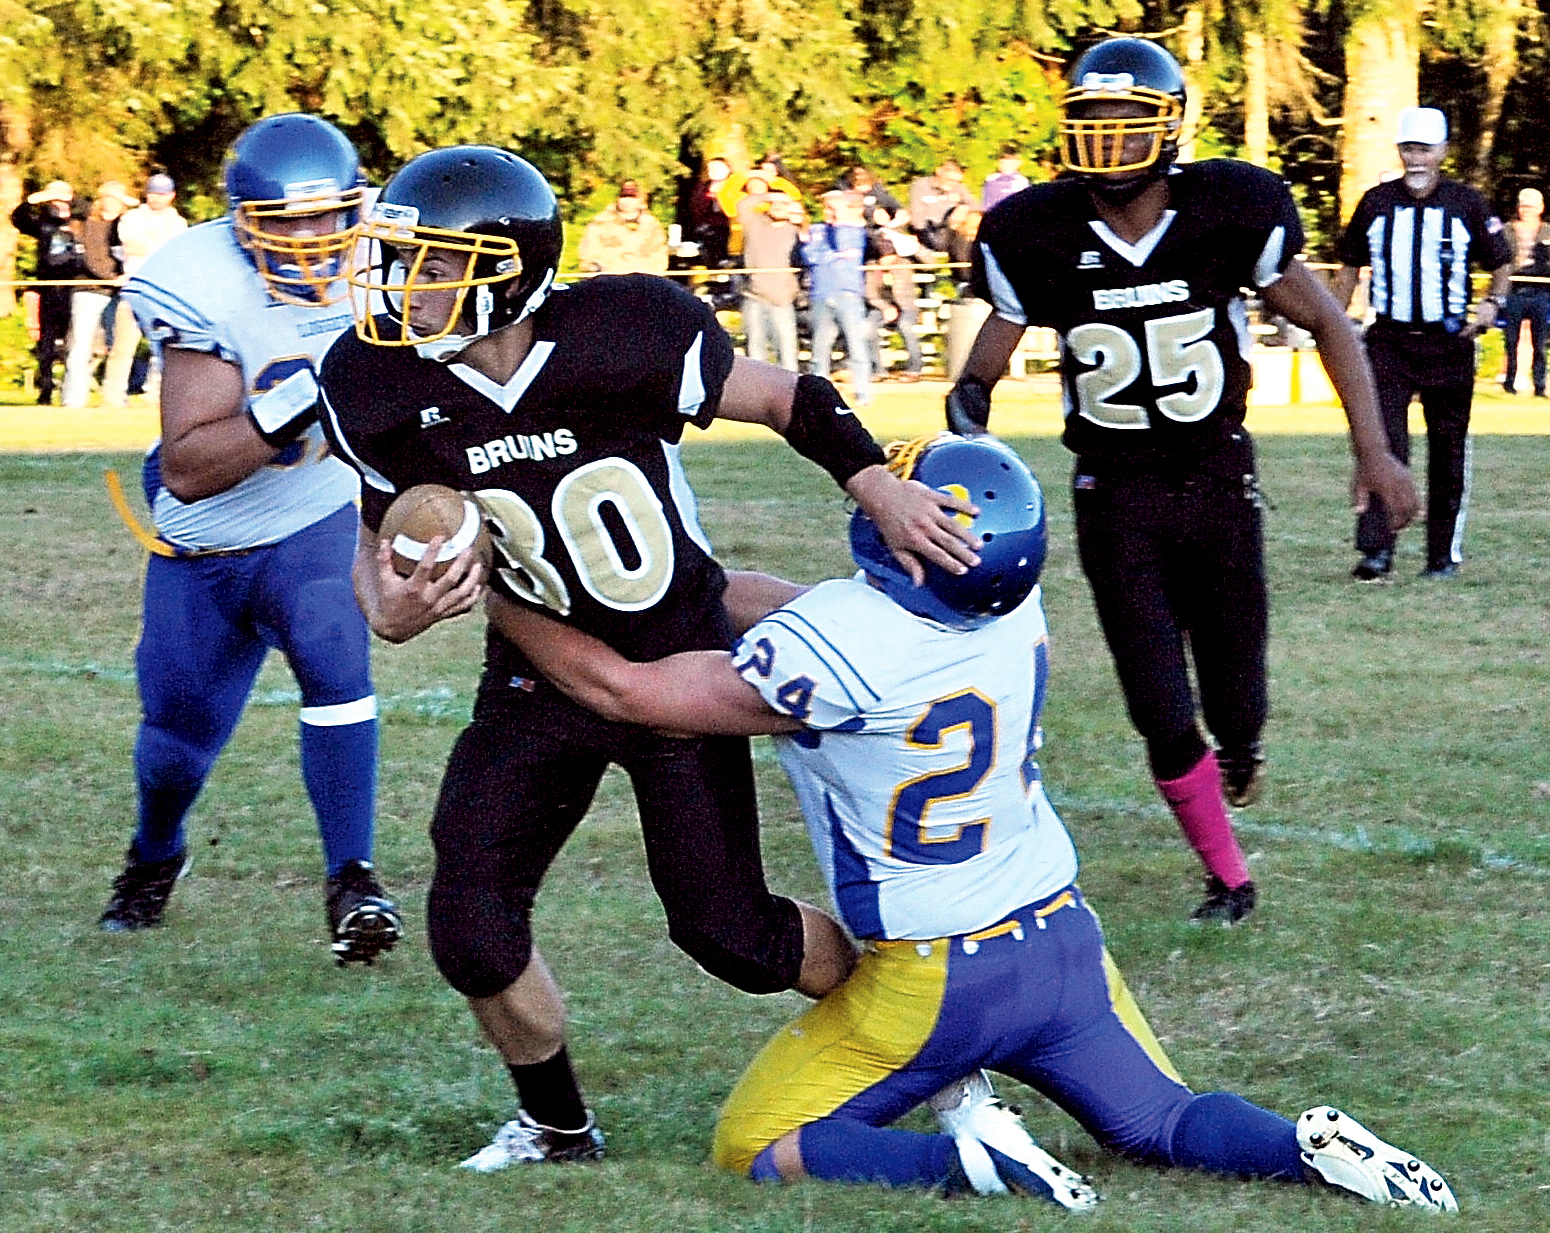 Clallam Bay running back Clayton Willis (30) attempts to escape the defense of Crescent's Wyatt McNeece